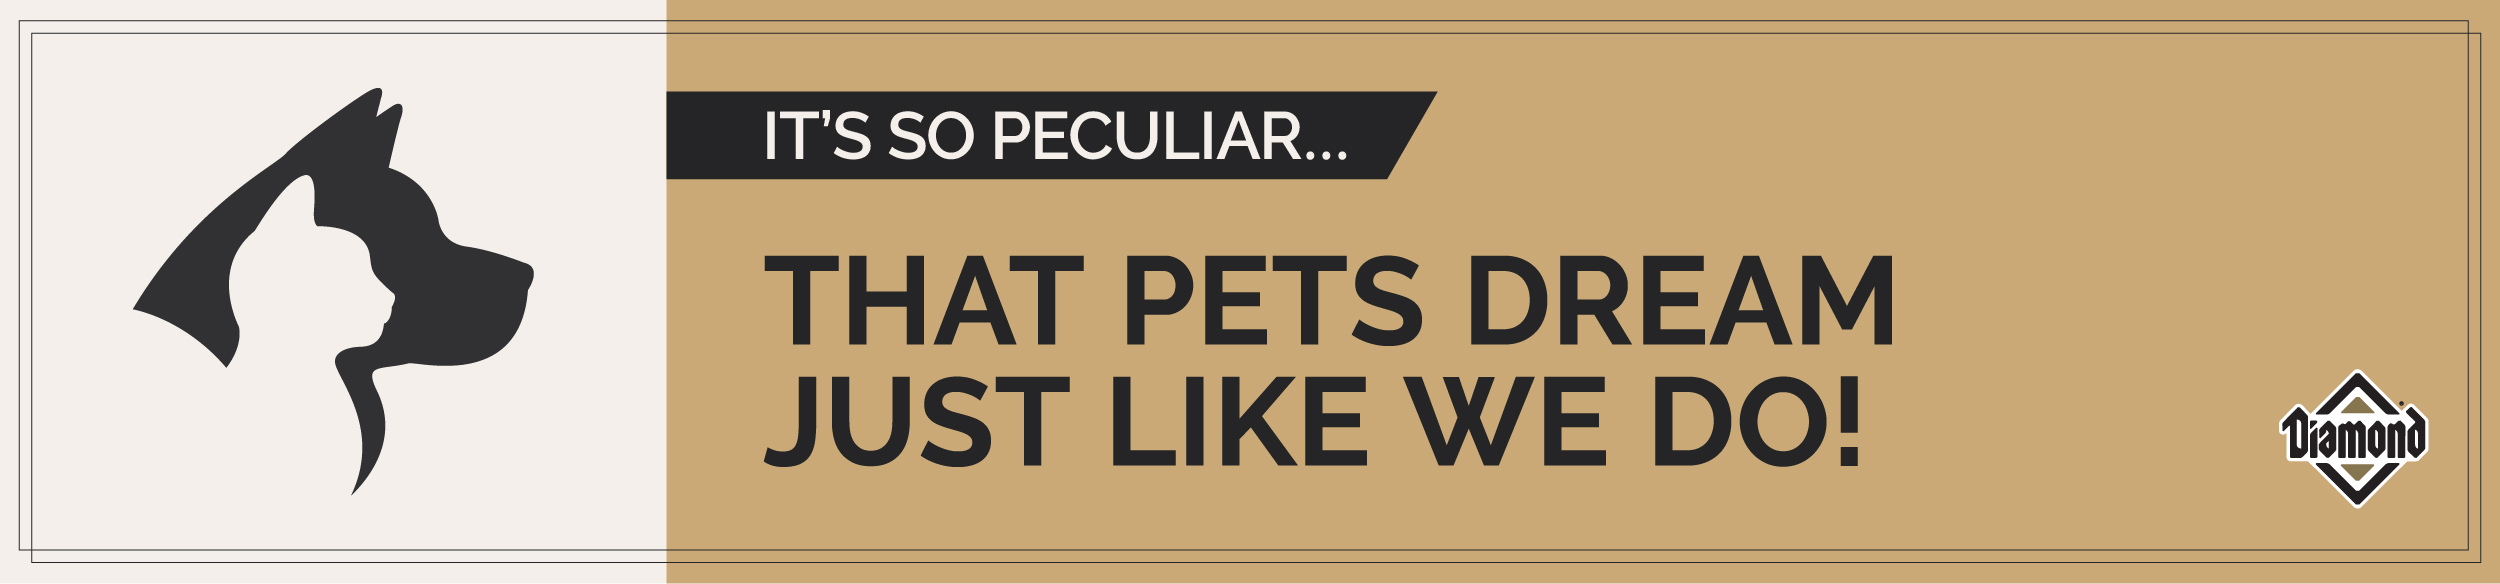 It's So Peculiar: That Pets Dream Just Like We Do Graphic | Diamond Pet Foods